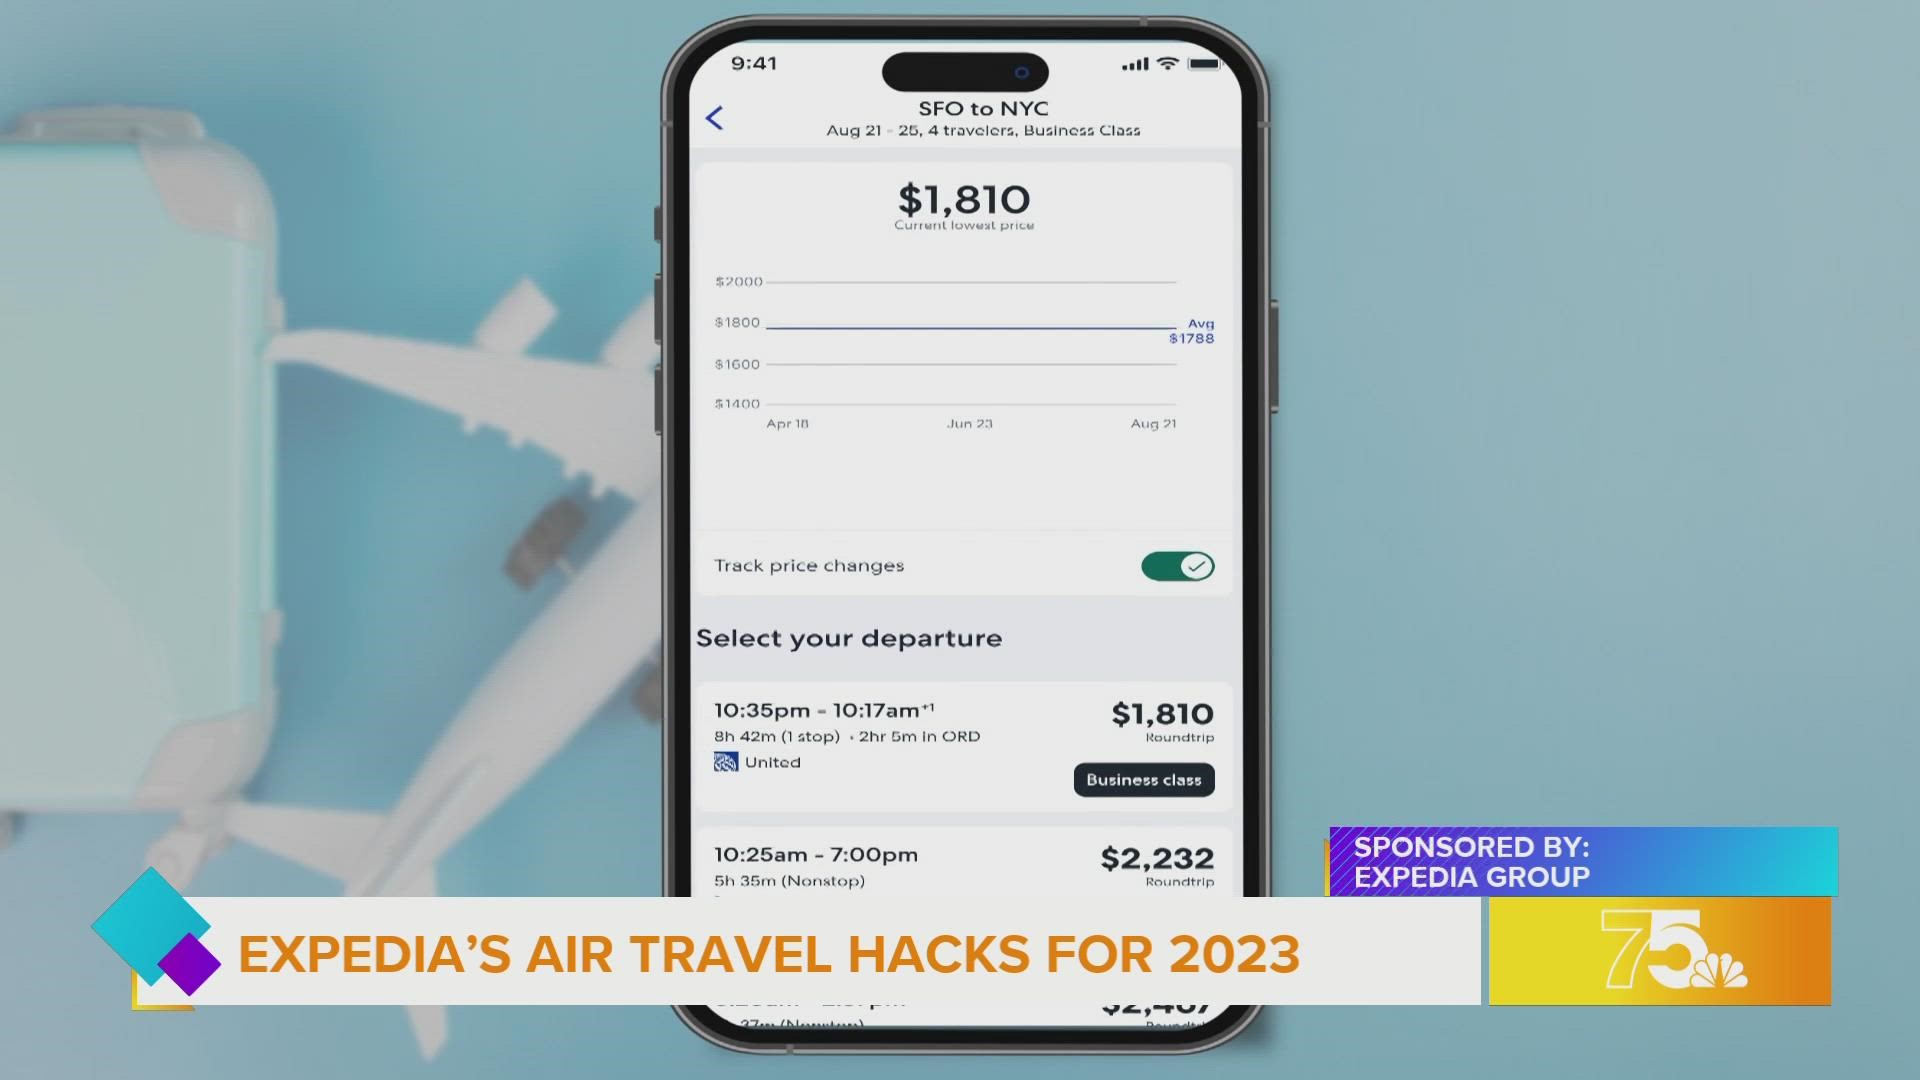 Travel contributor Melanie Fish gives us an inside look at Expedia’s air travel hacks for 2023.